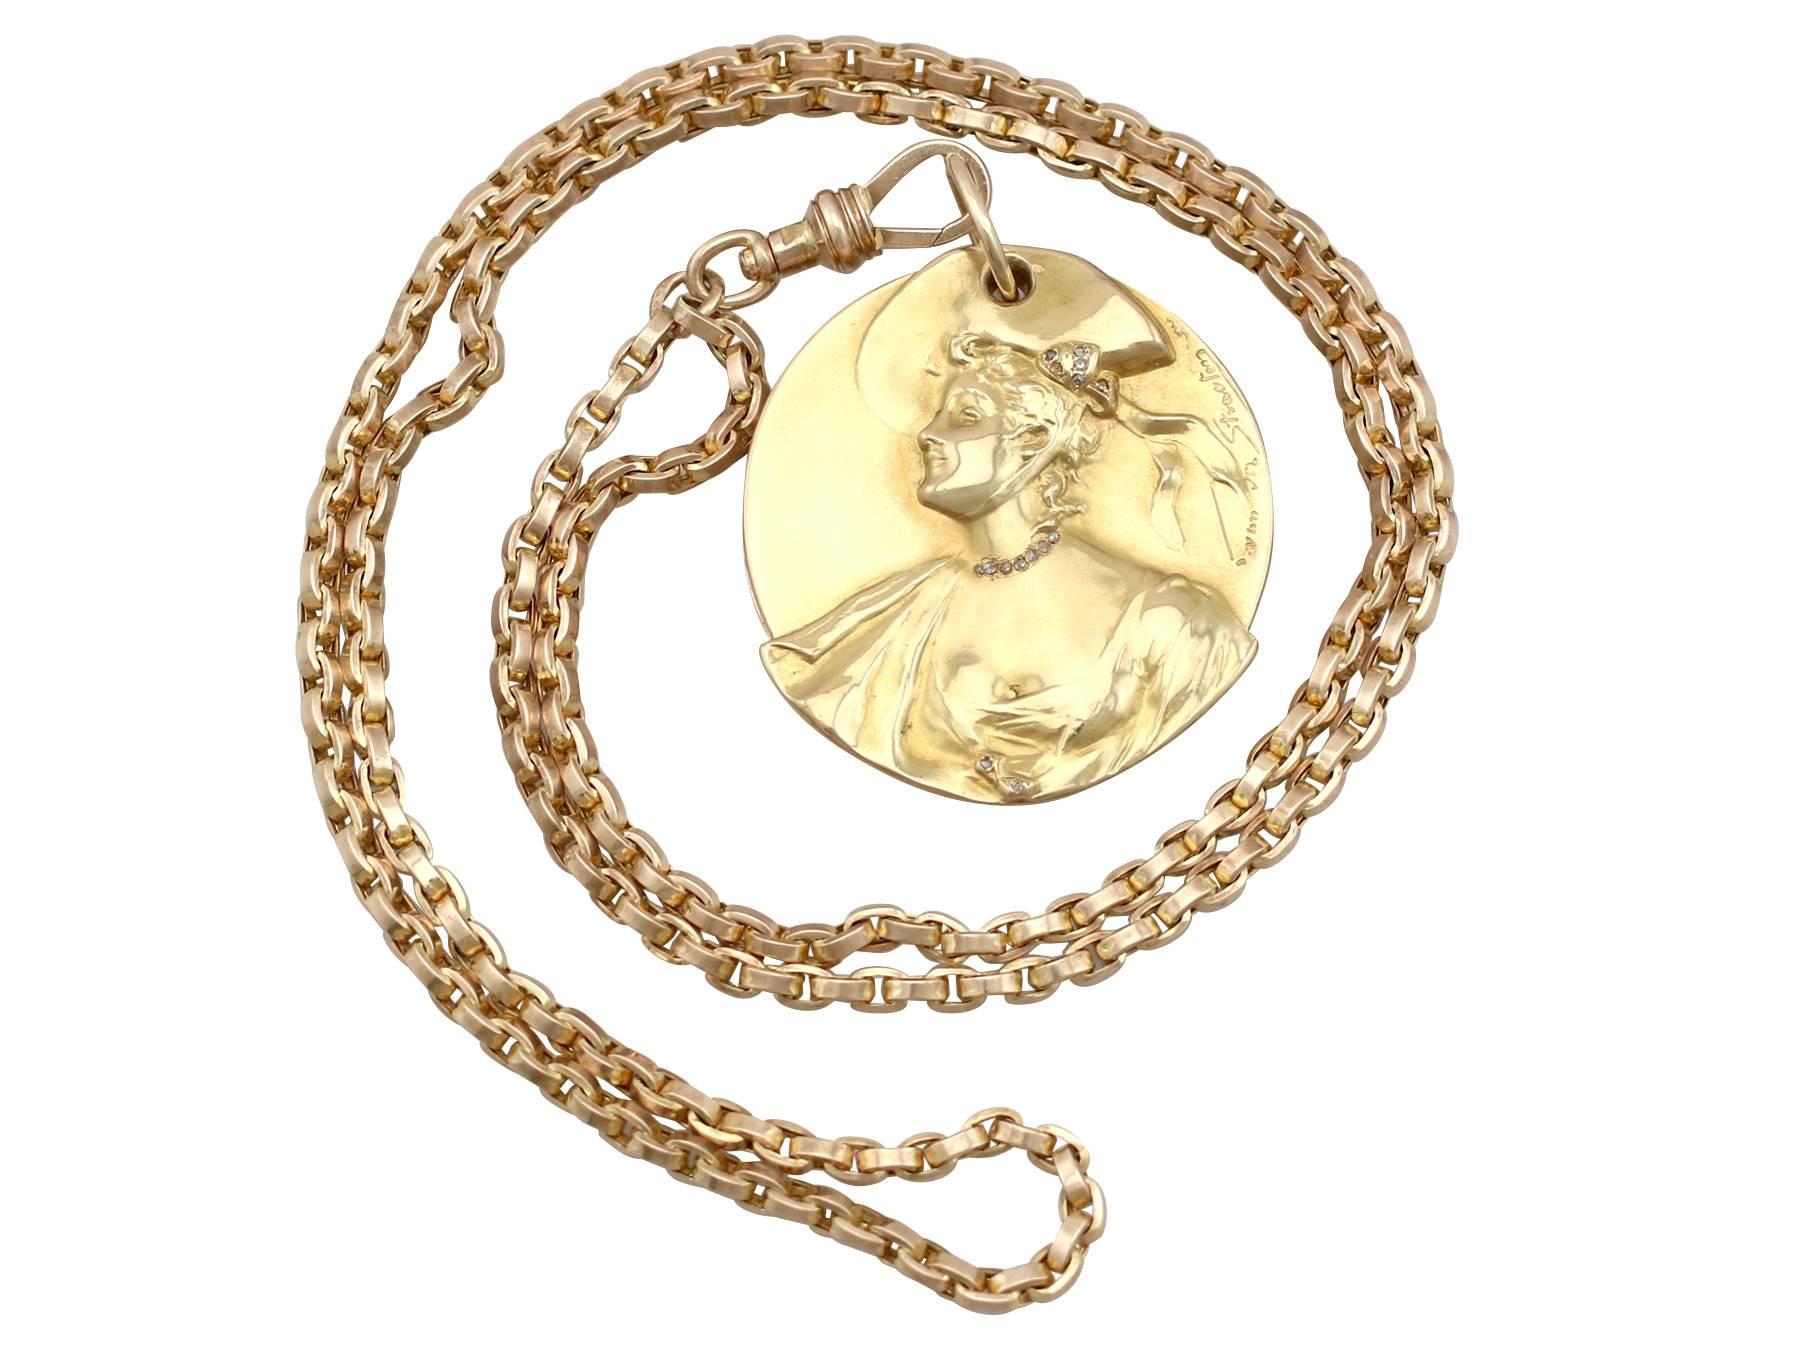 An exceptional antique 0.07 carat diamond and 18 carat yellow gold locket (circa 1920) with 9 carat yellow gold belcher chain (circa 1890).

This exceptional, fine and impressive antique French locket has been crafted in 18 ct yellow gold.

The